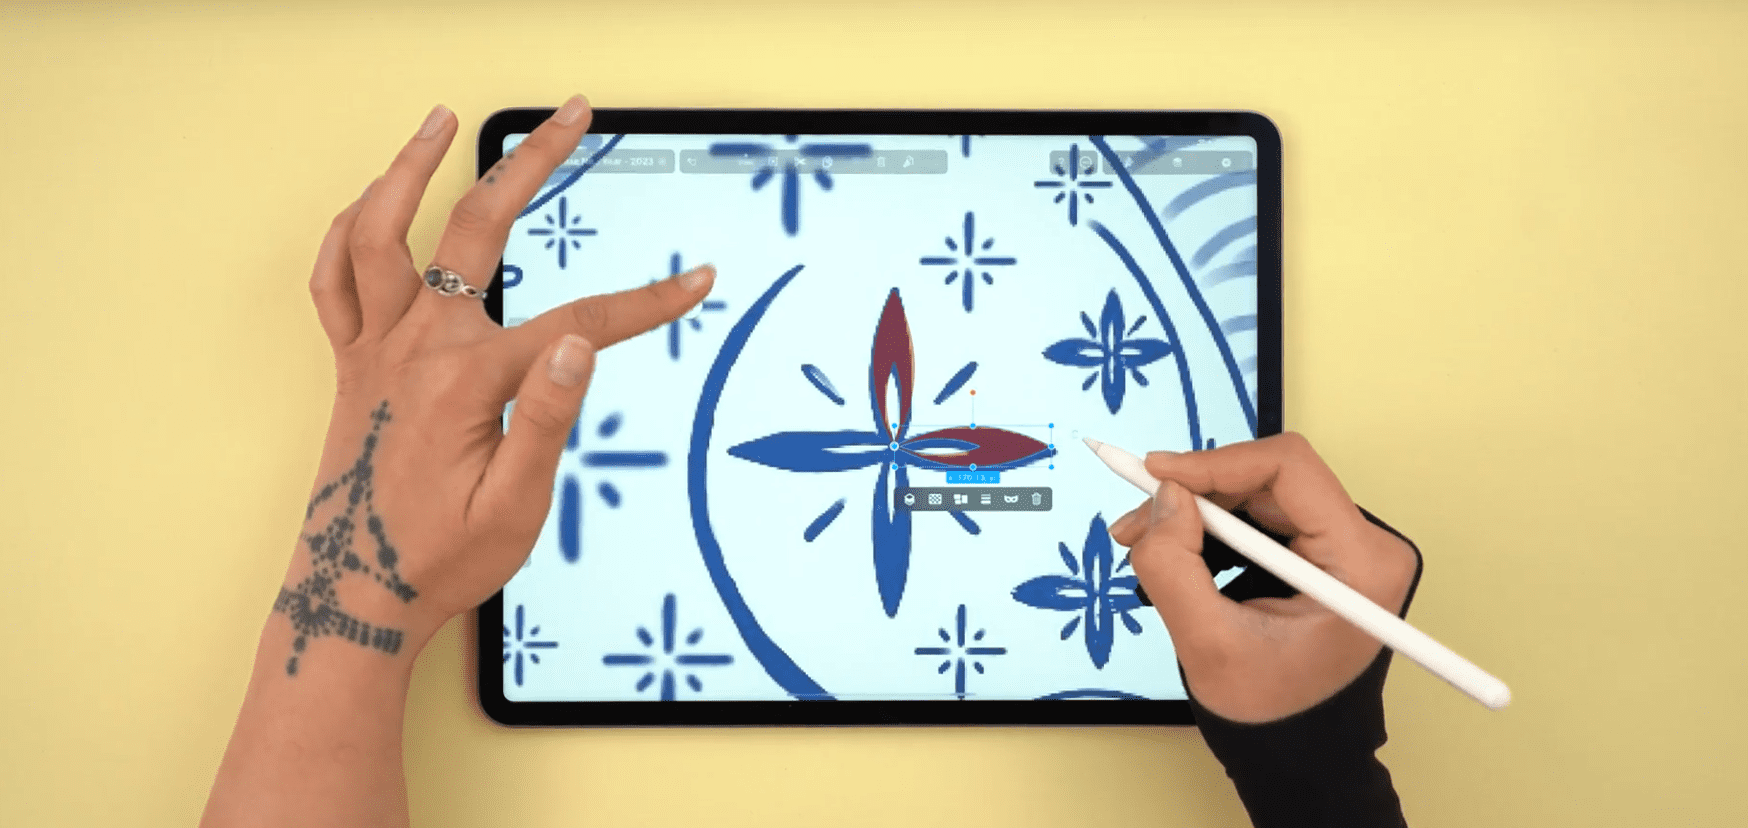  Hands using a stylus on a tablet to create a blue floral design